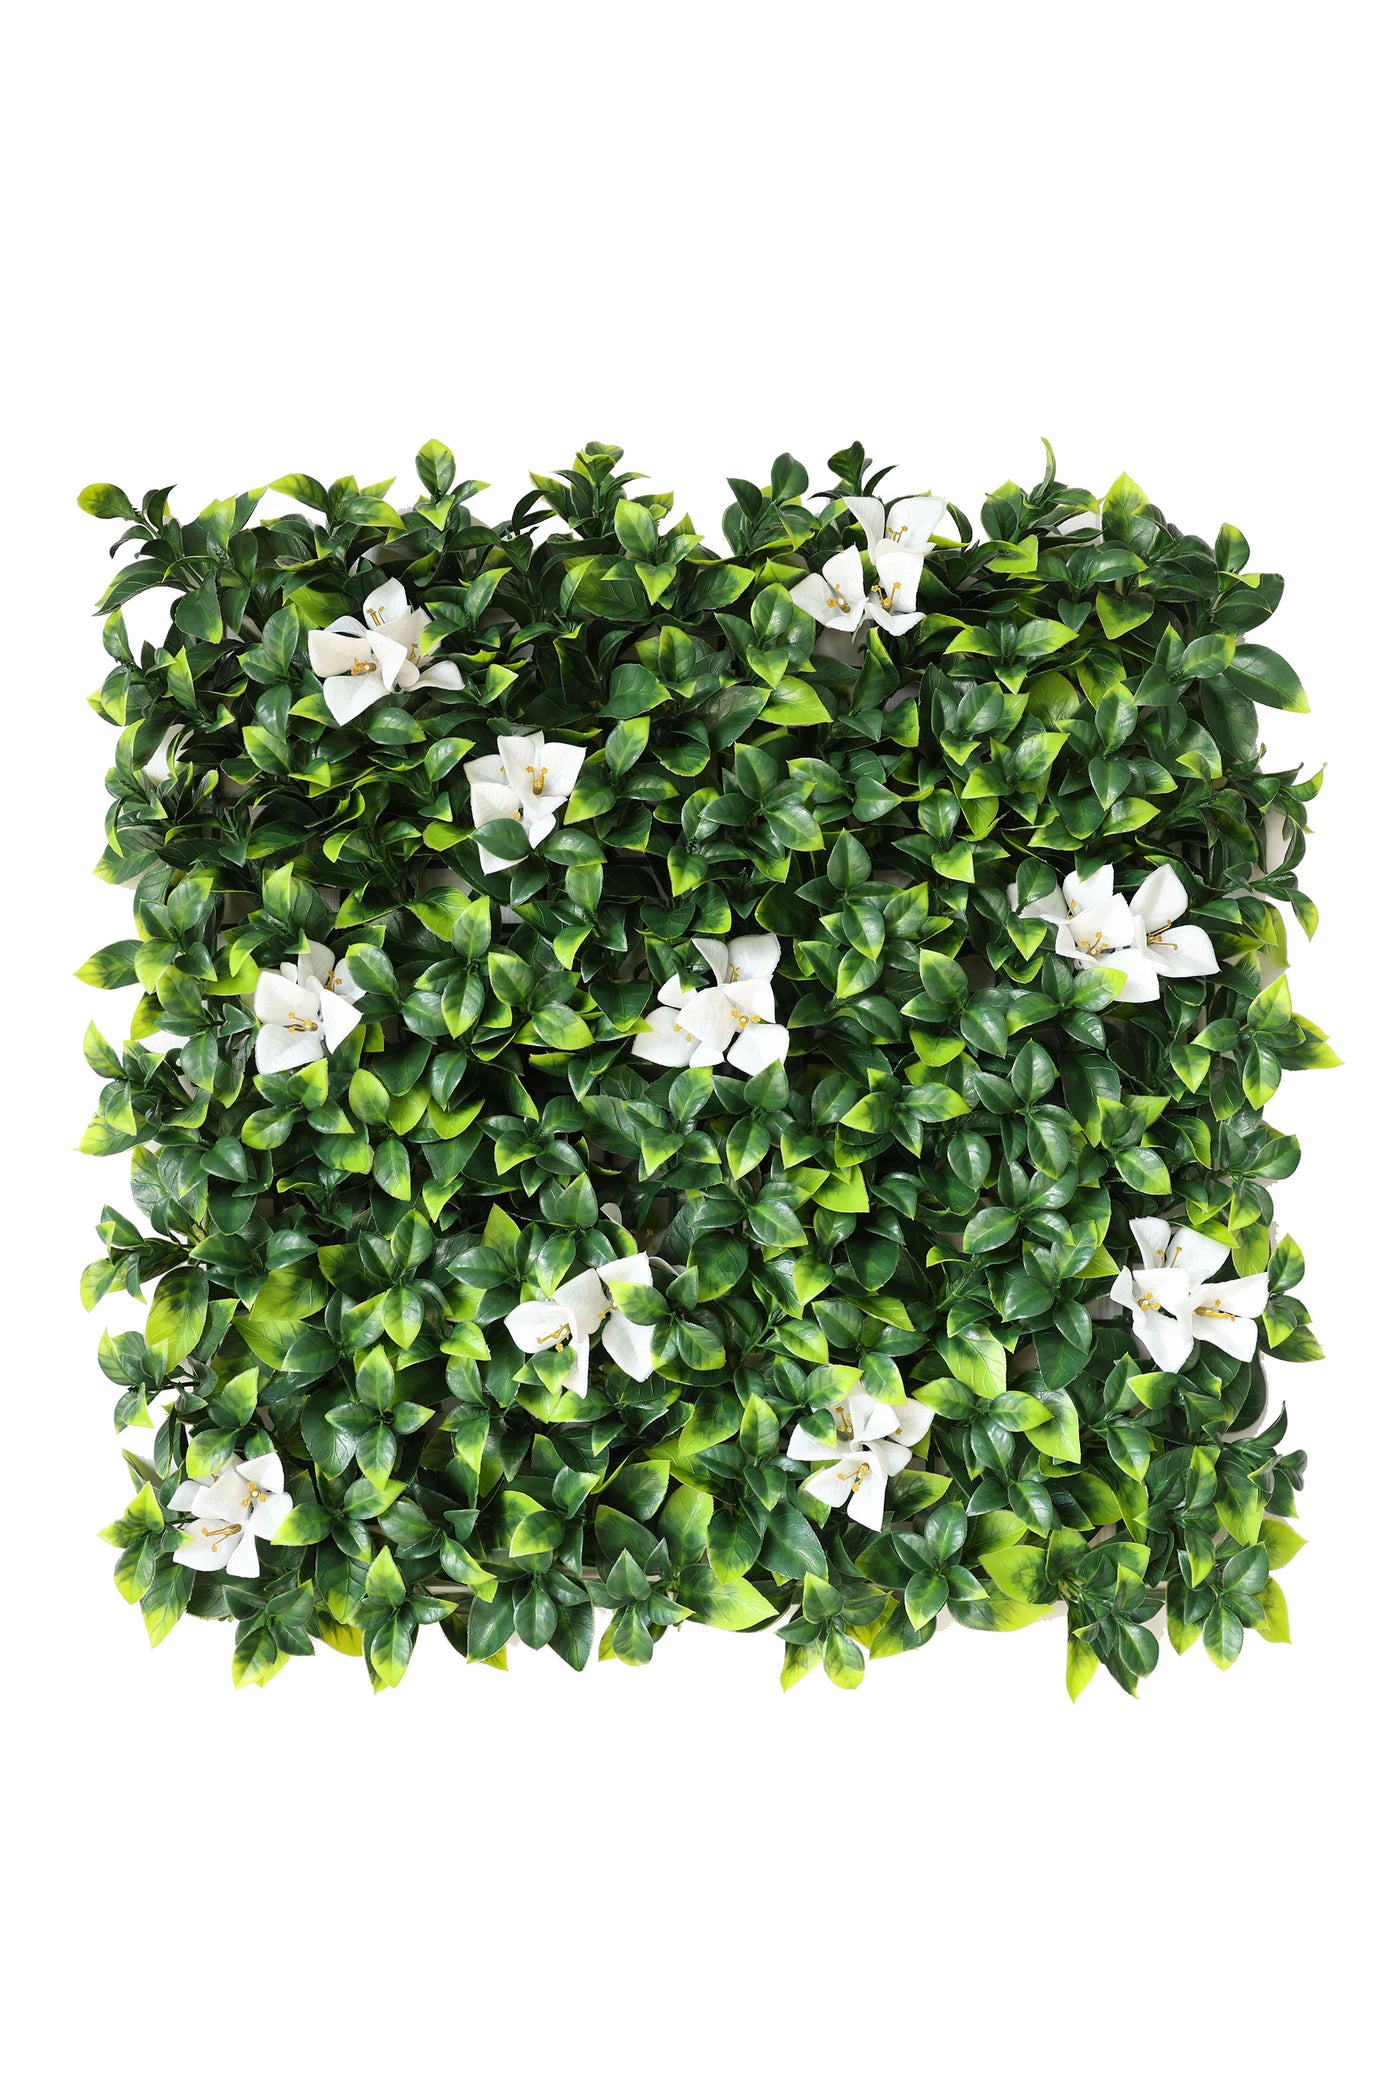 Blossom White Flowers With Long Lush Green Leaves Artificial Vertical Garden Wall Tile (Pack of 1)